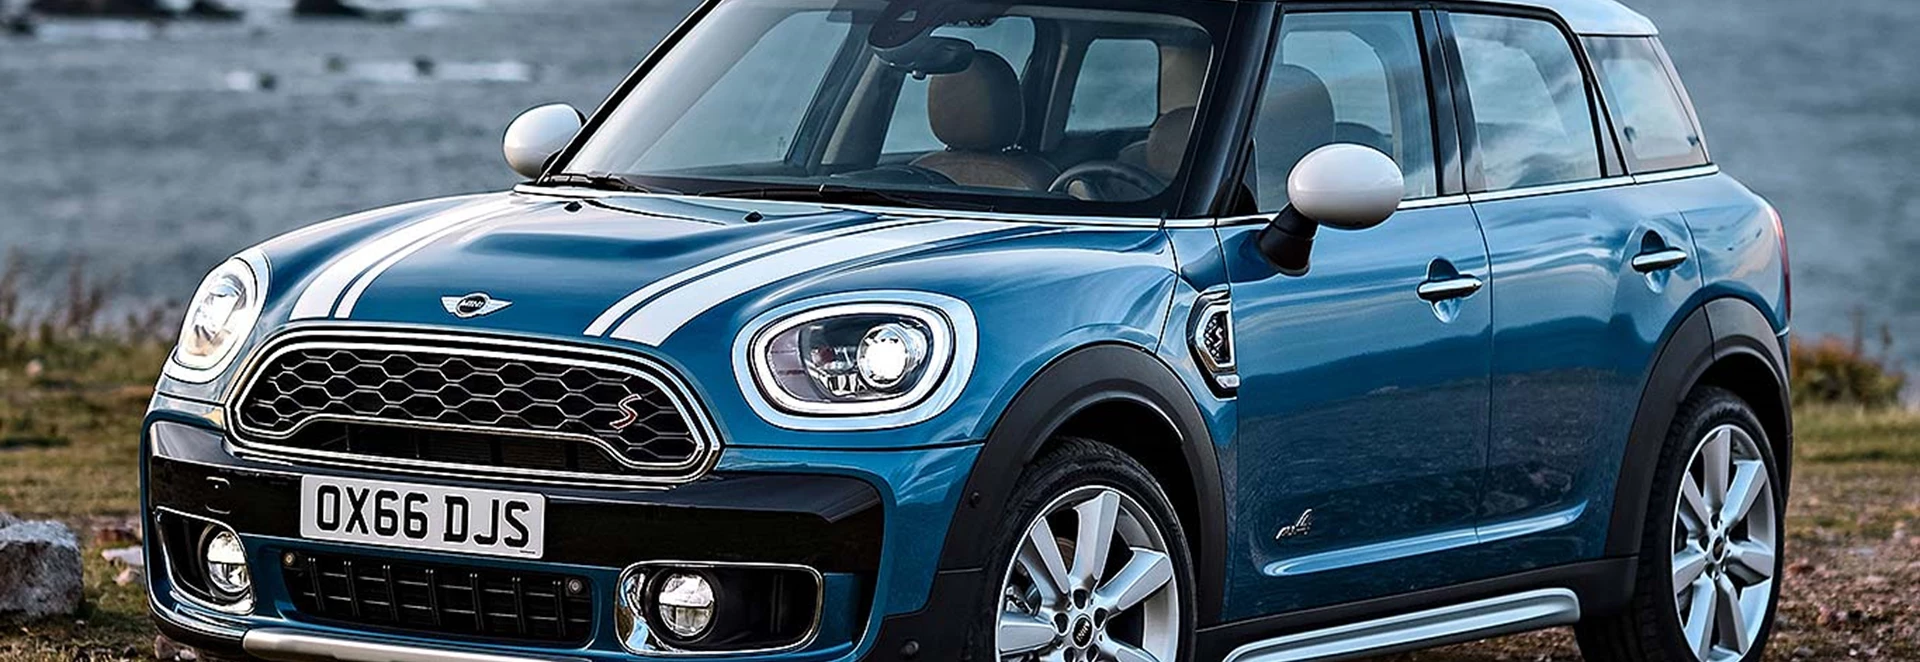 All-new MINI Countryman unveiled, priced from £22,465